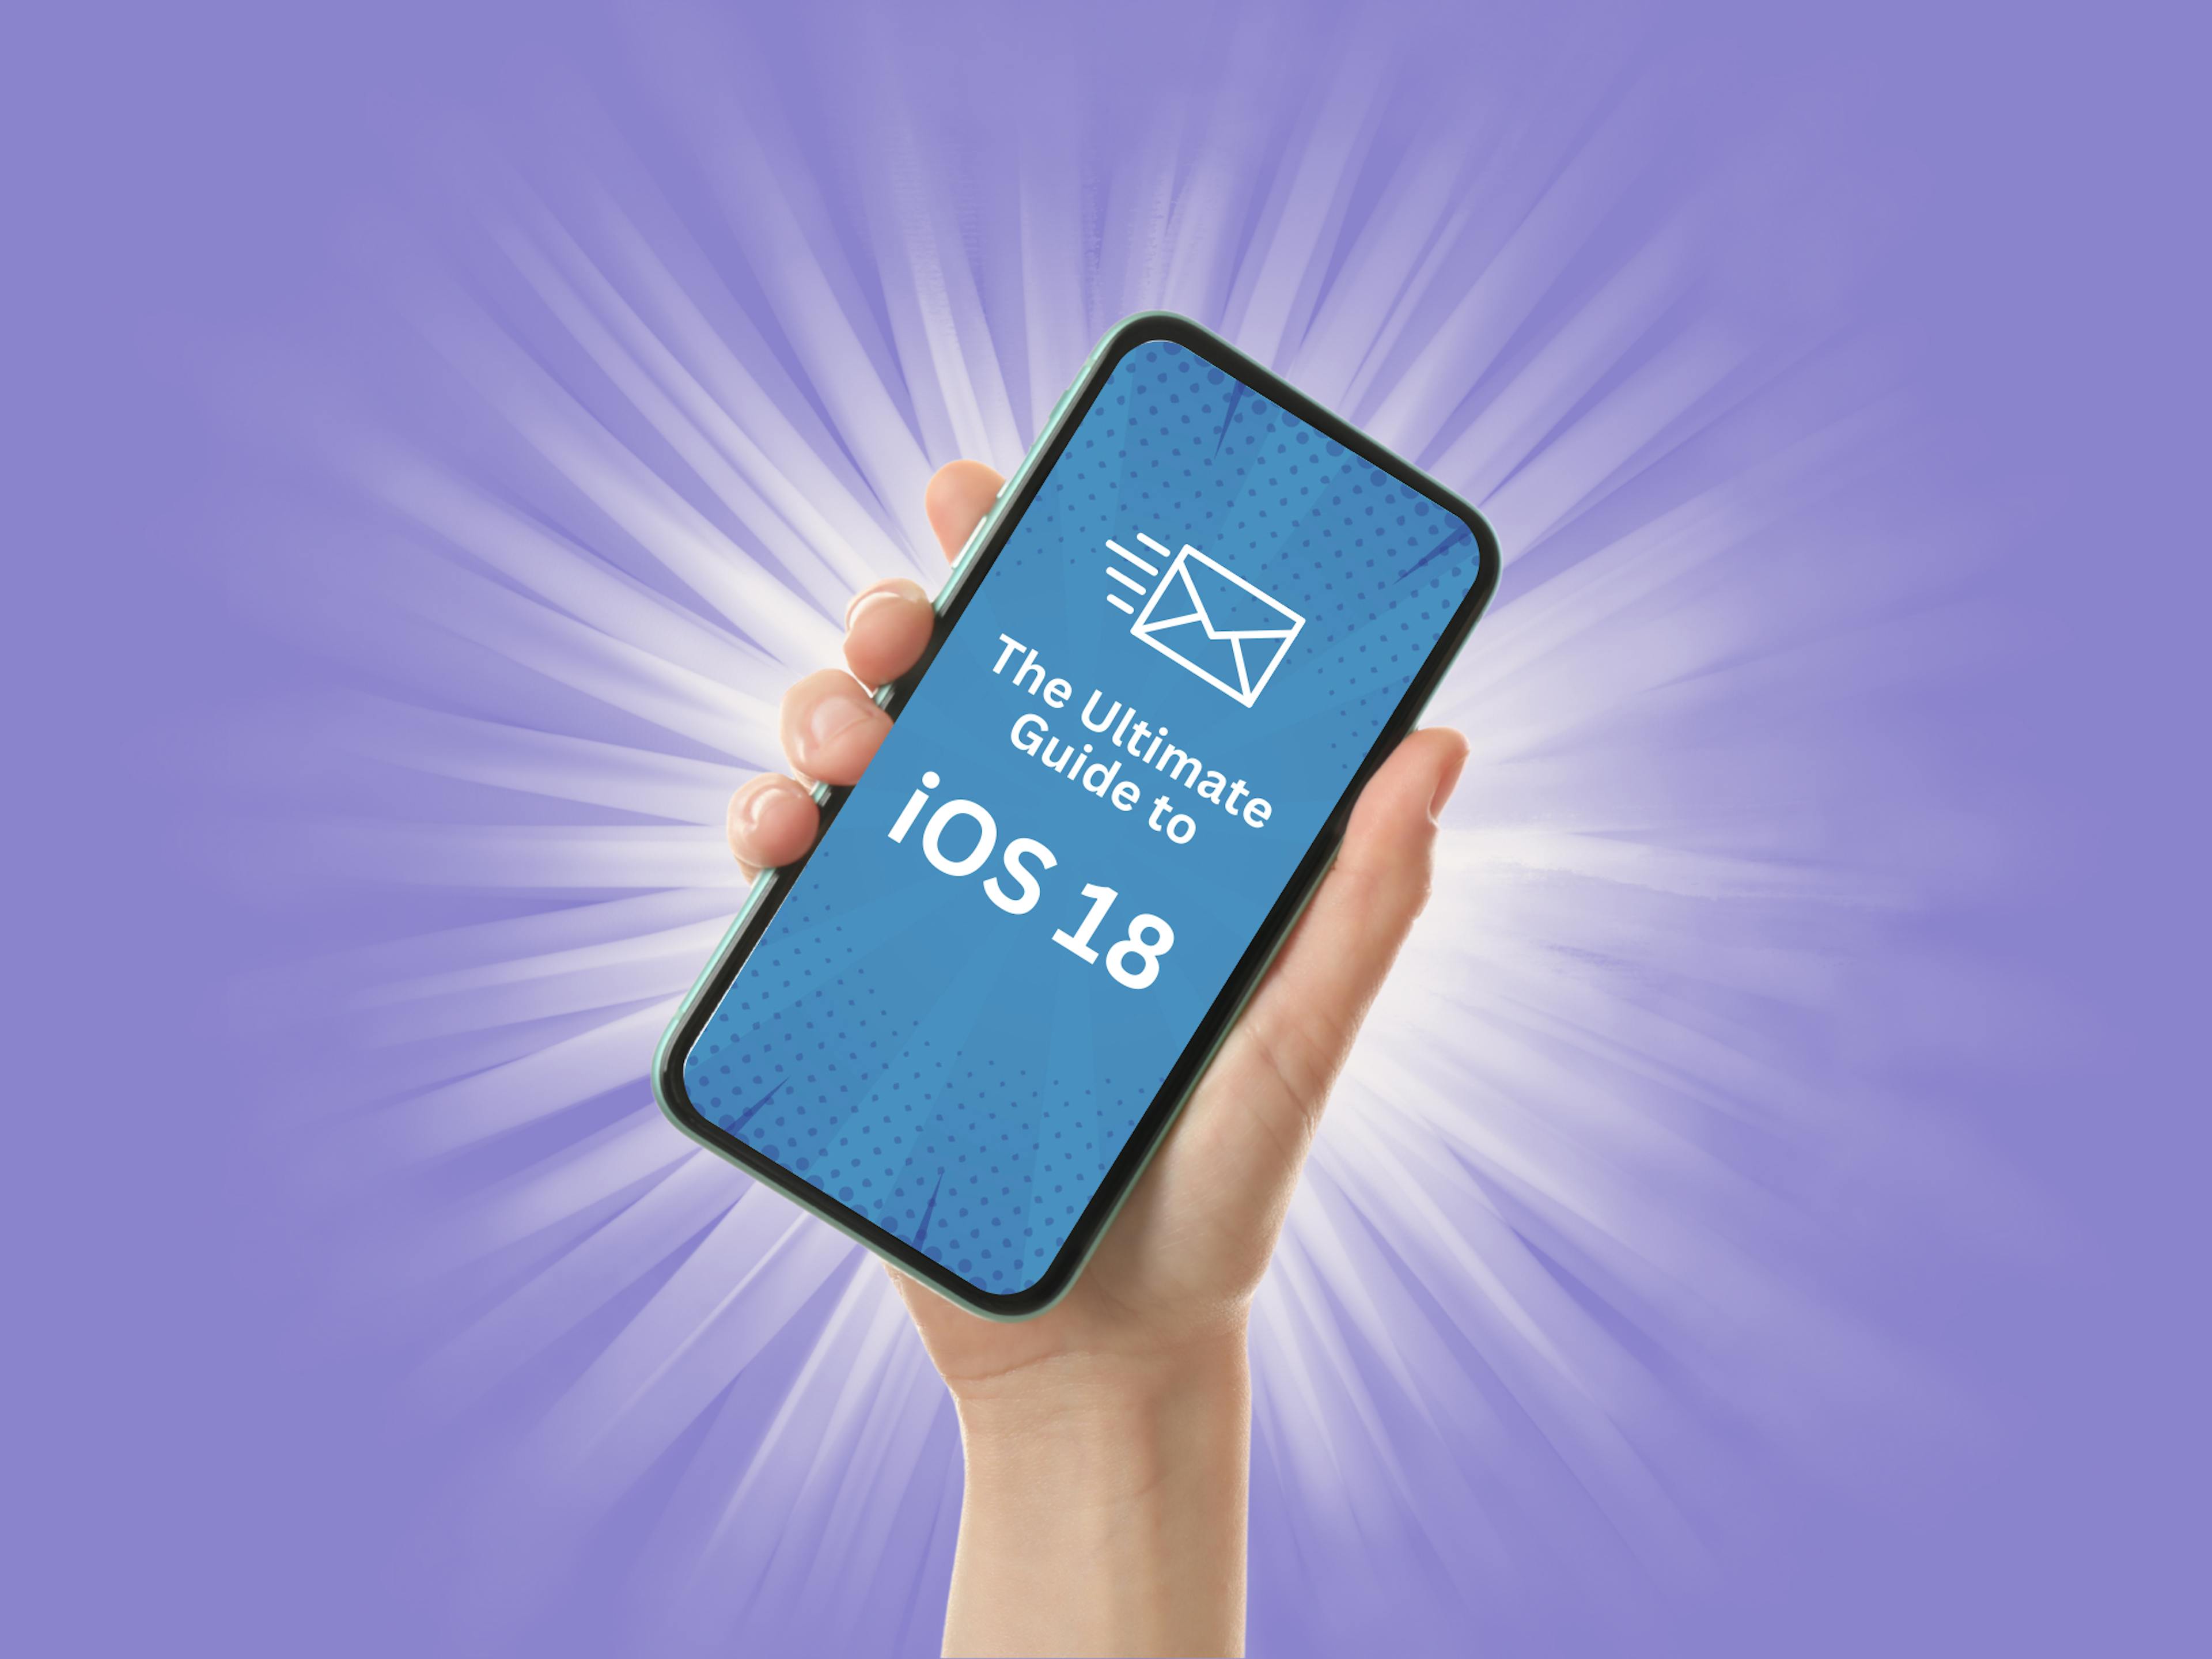 The Email Marketer’s Guide to iOS 18